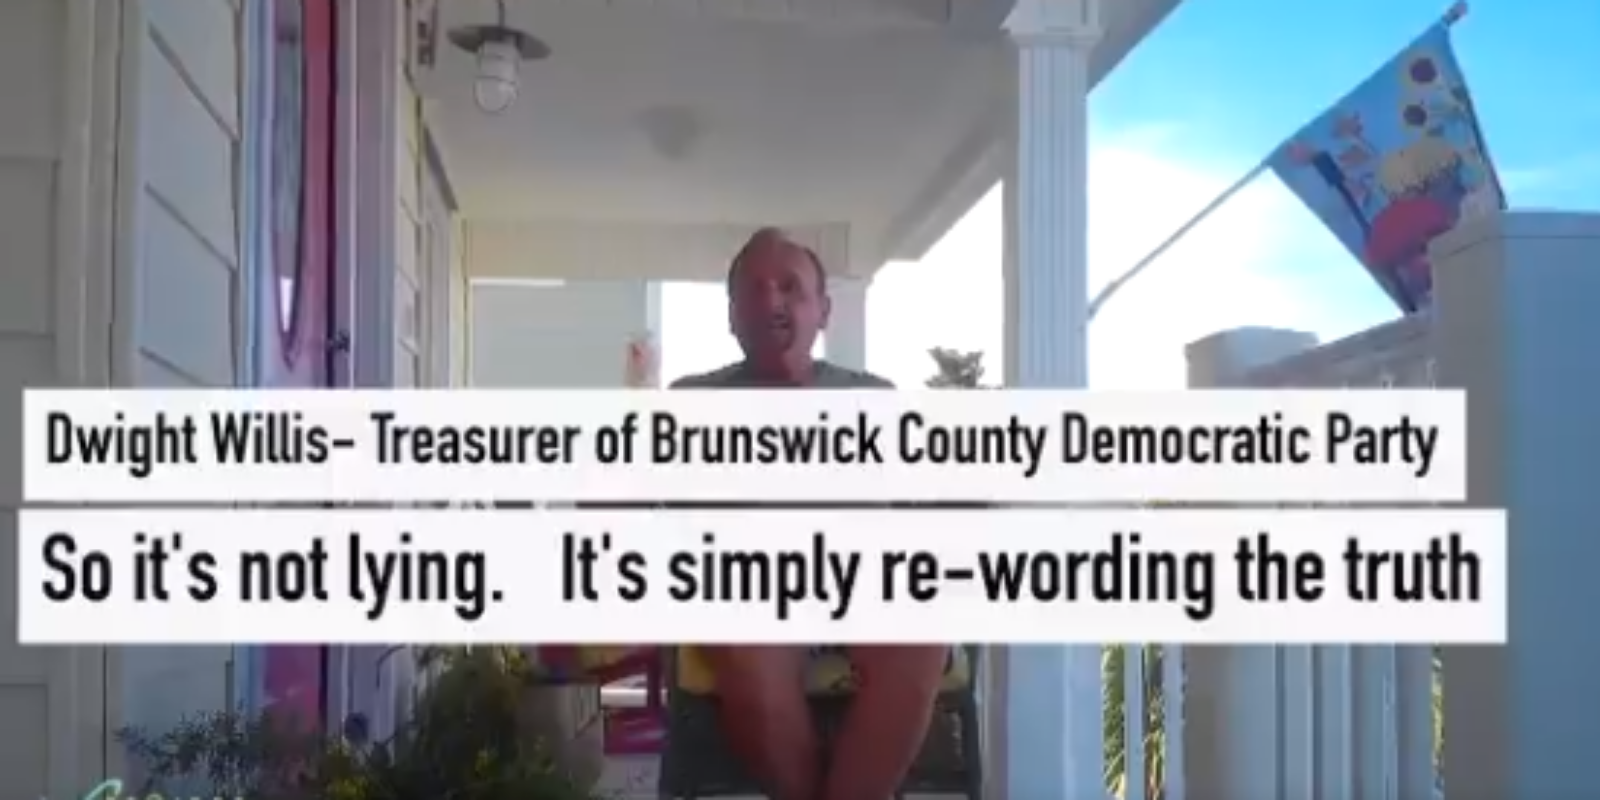 WATCH: Southern Democrat being coached to hide the truth from voters